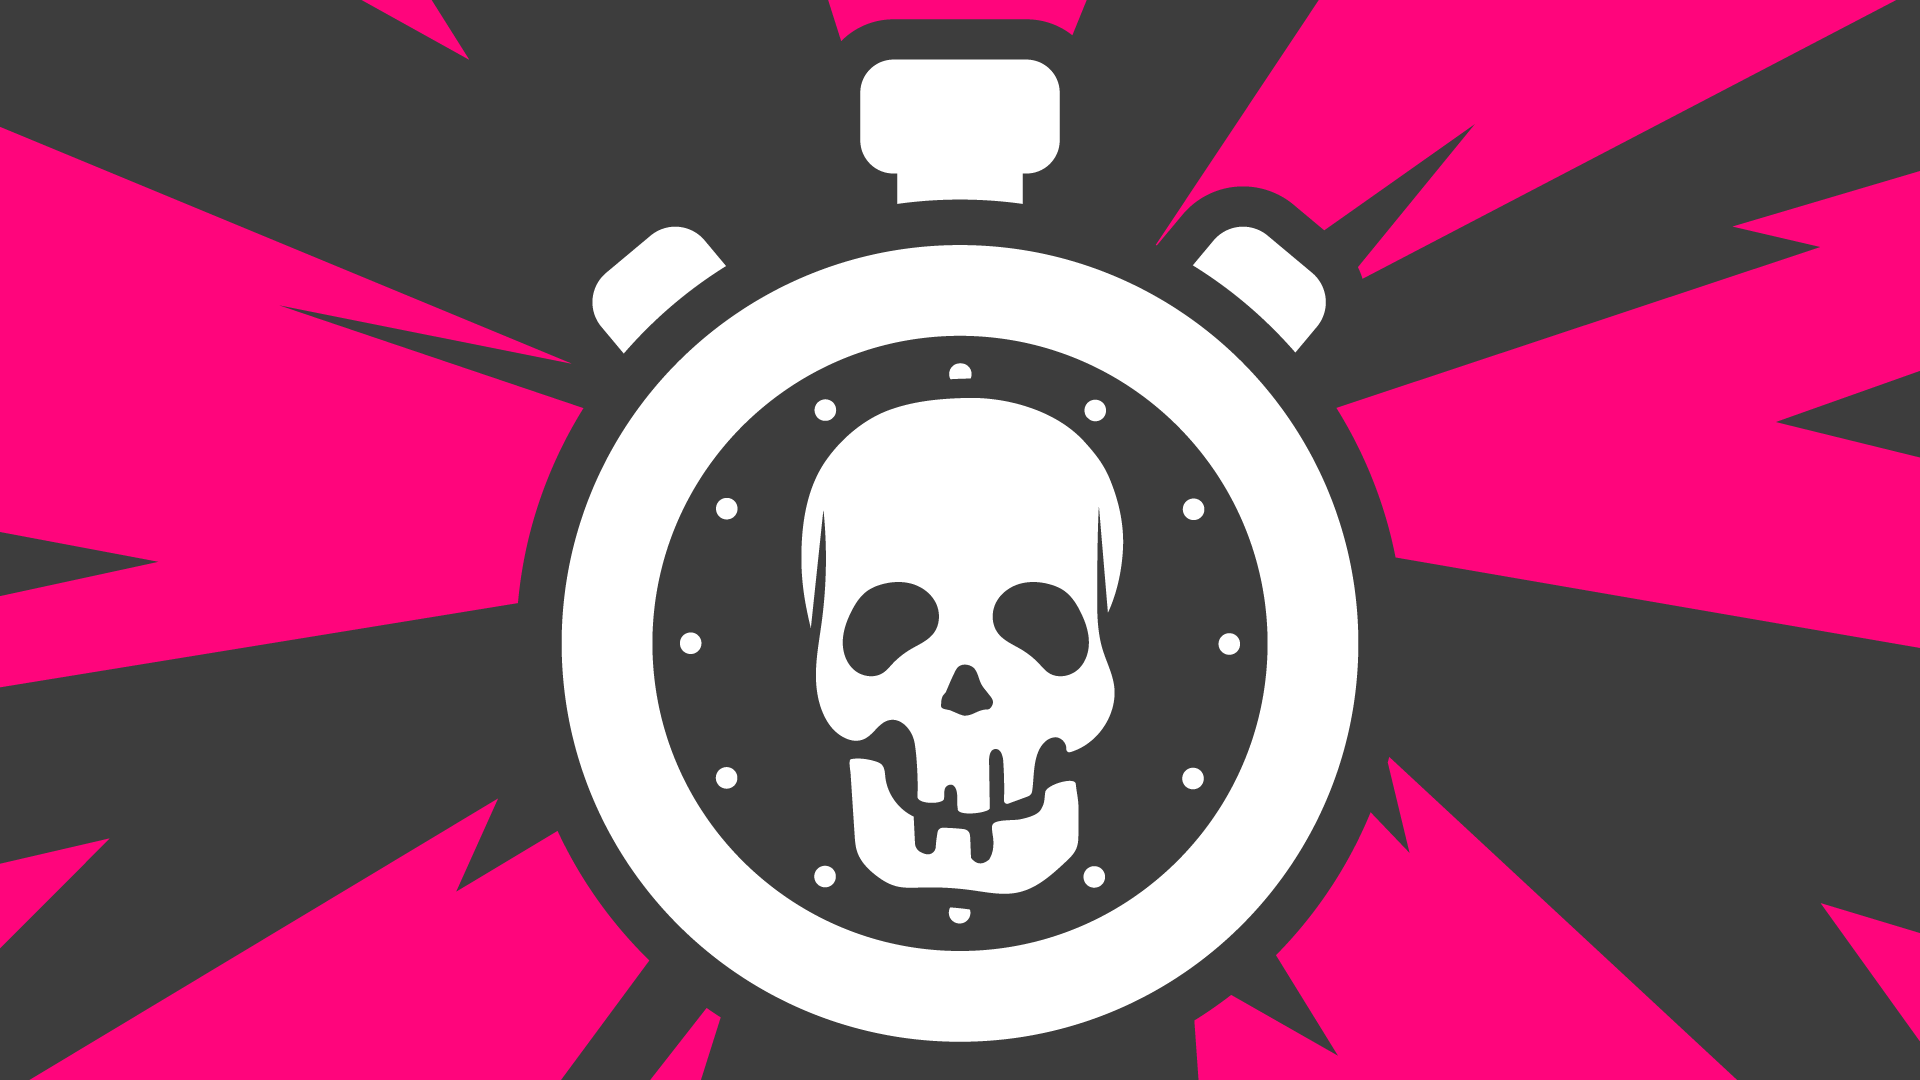 Icon for Boss Rush Level 1